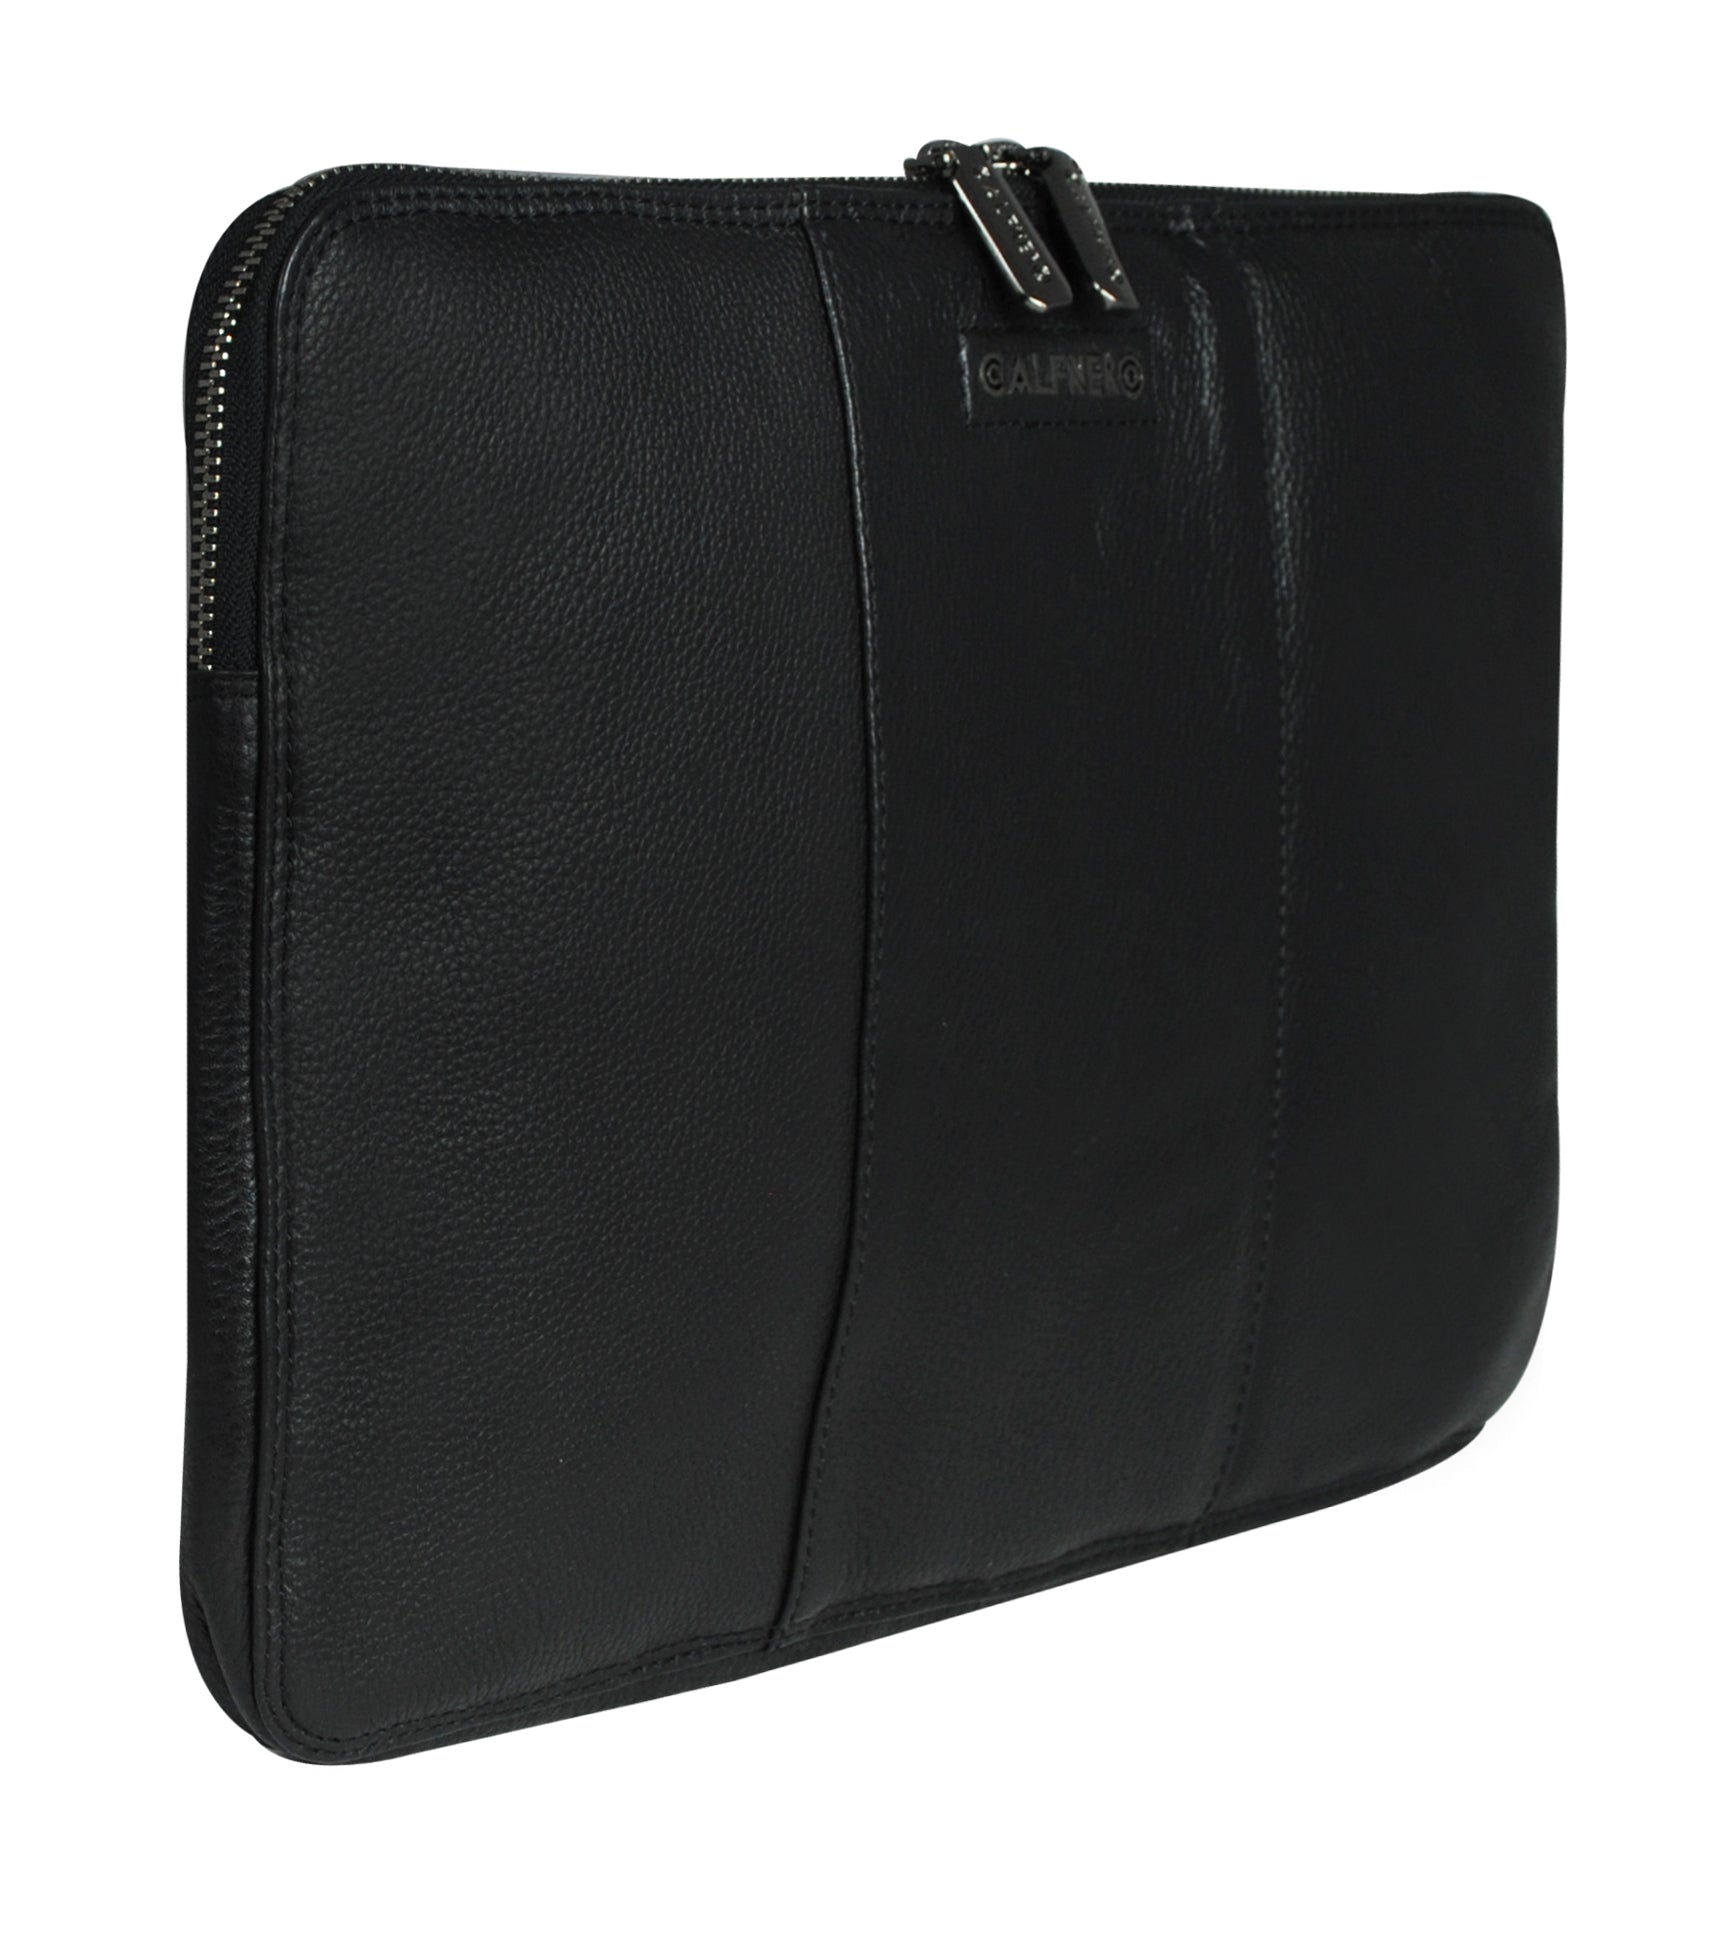 Leather Ipad Cover at Best Price in Ahmedabad, Gujarat | Dorado